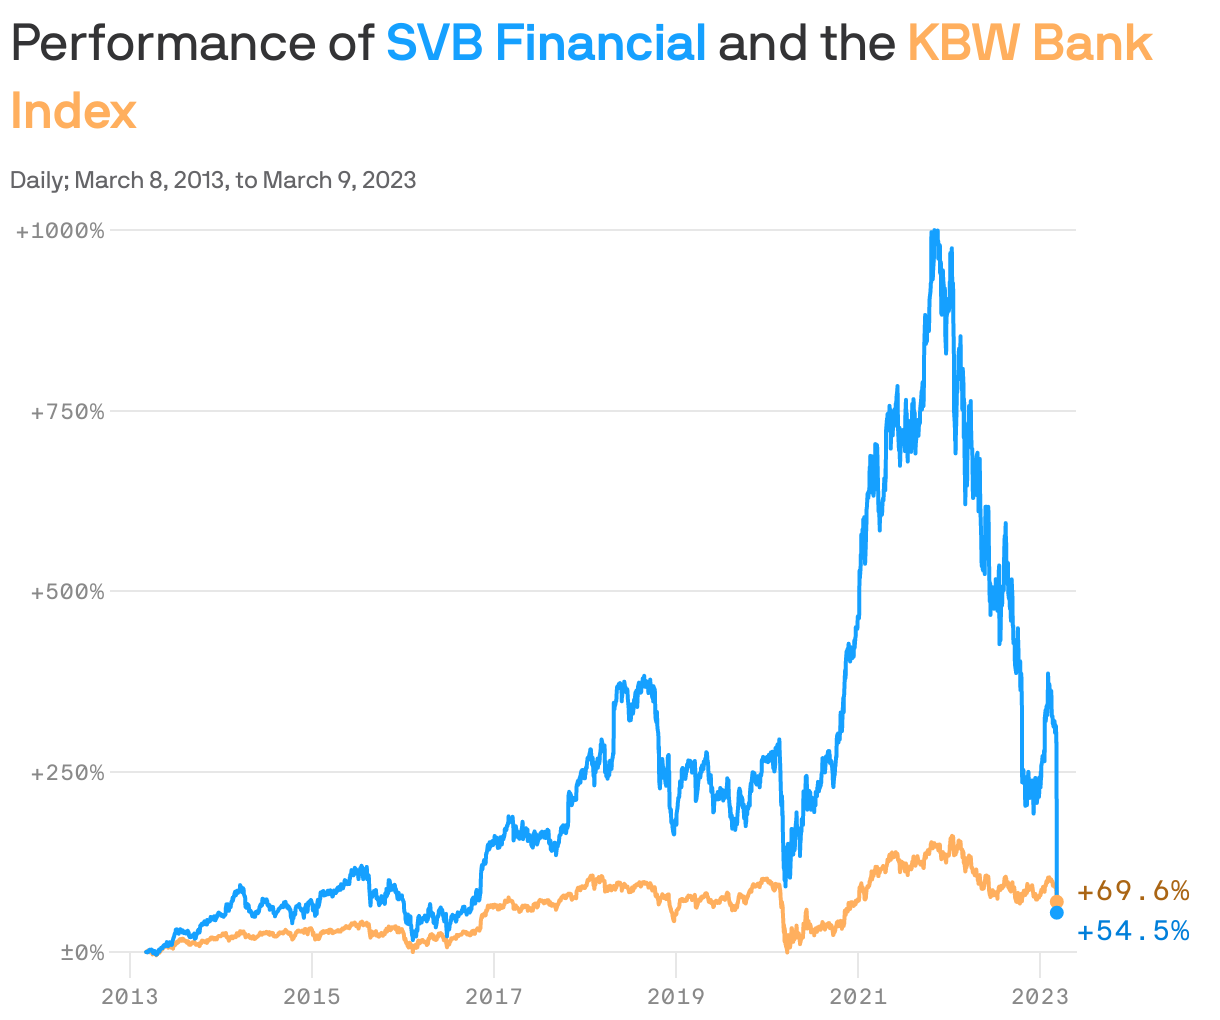 Performance of <b style="color: #15a0ff">SVB Financial</b> and the <b style="color: #ffaf5e">KBW Bank Index</b>